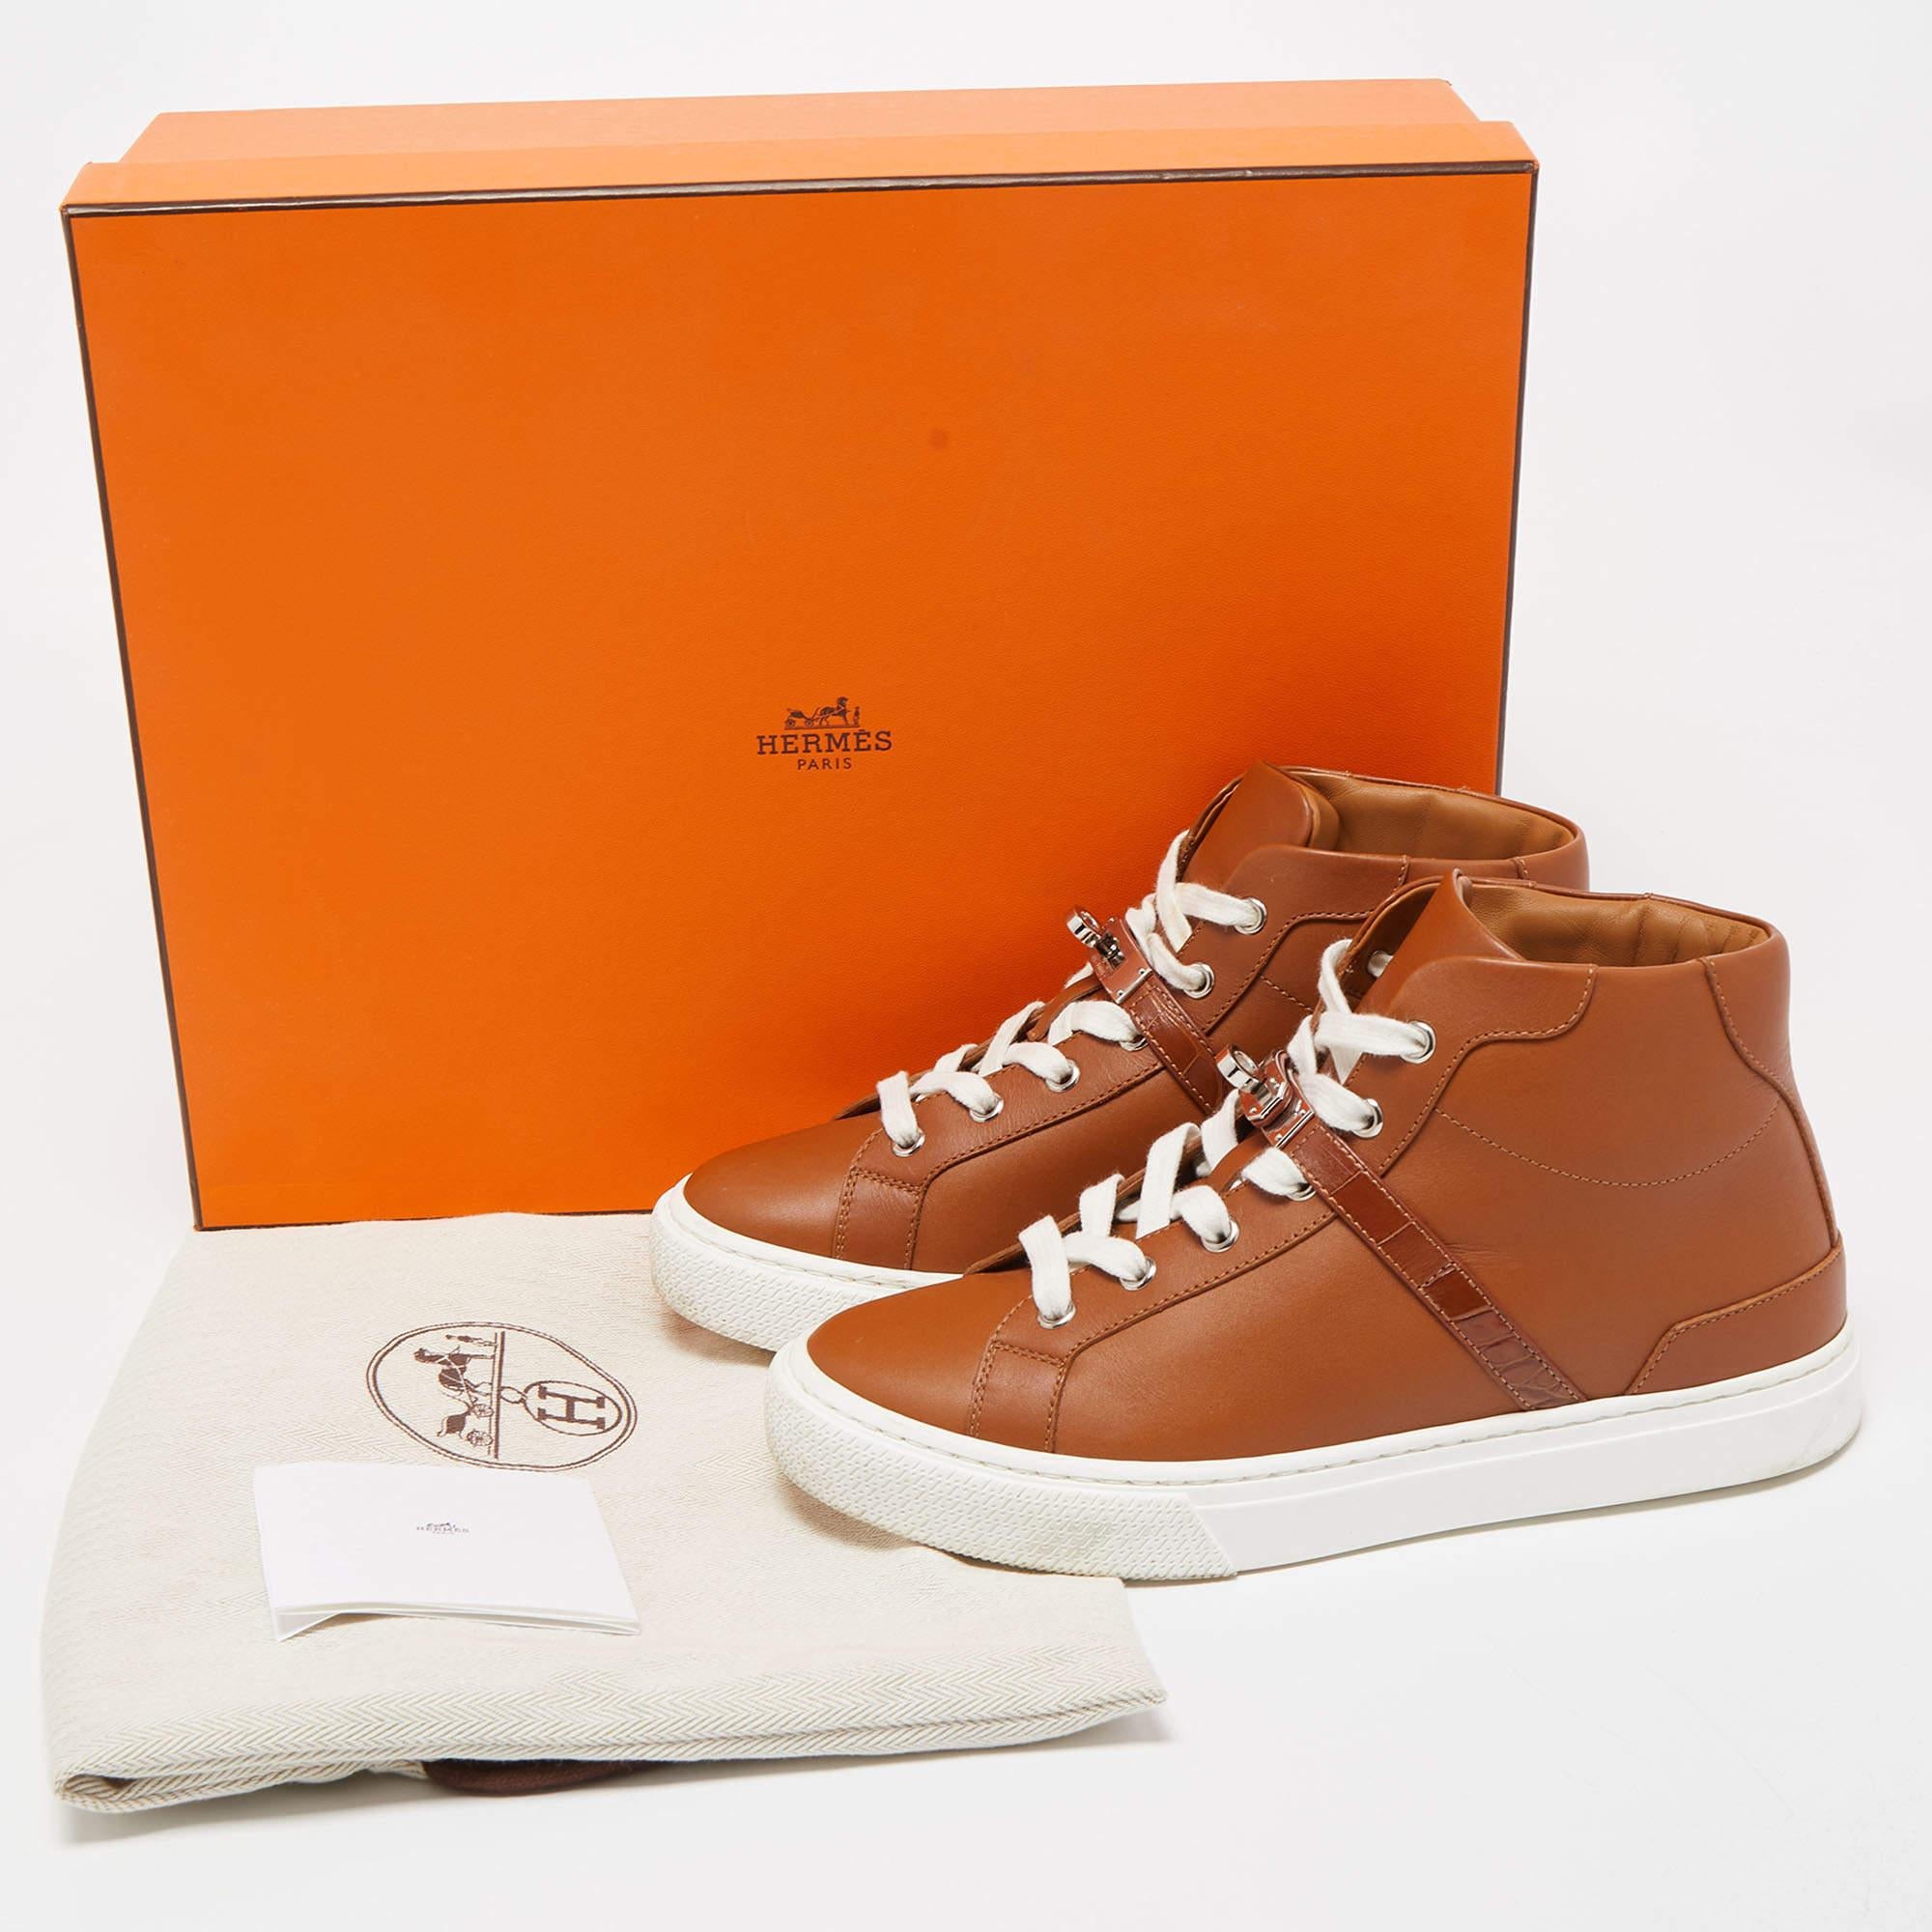 Hermes Brown Leather Daydream High Top Sneakers Size 37.5 4